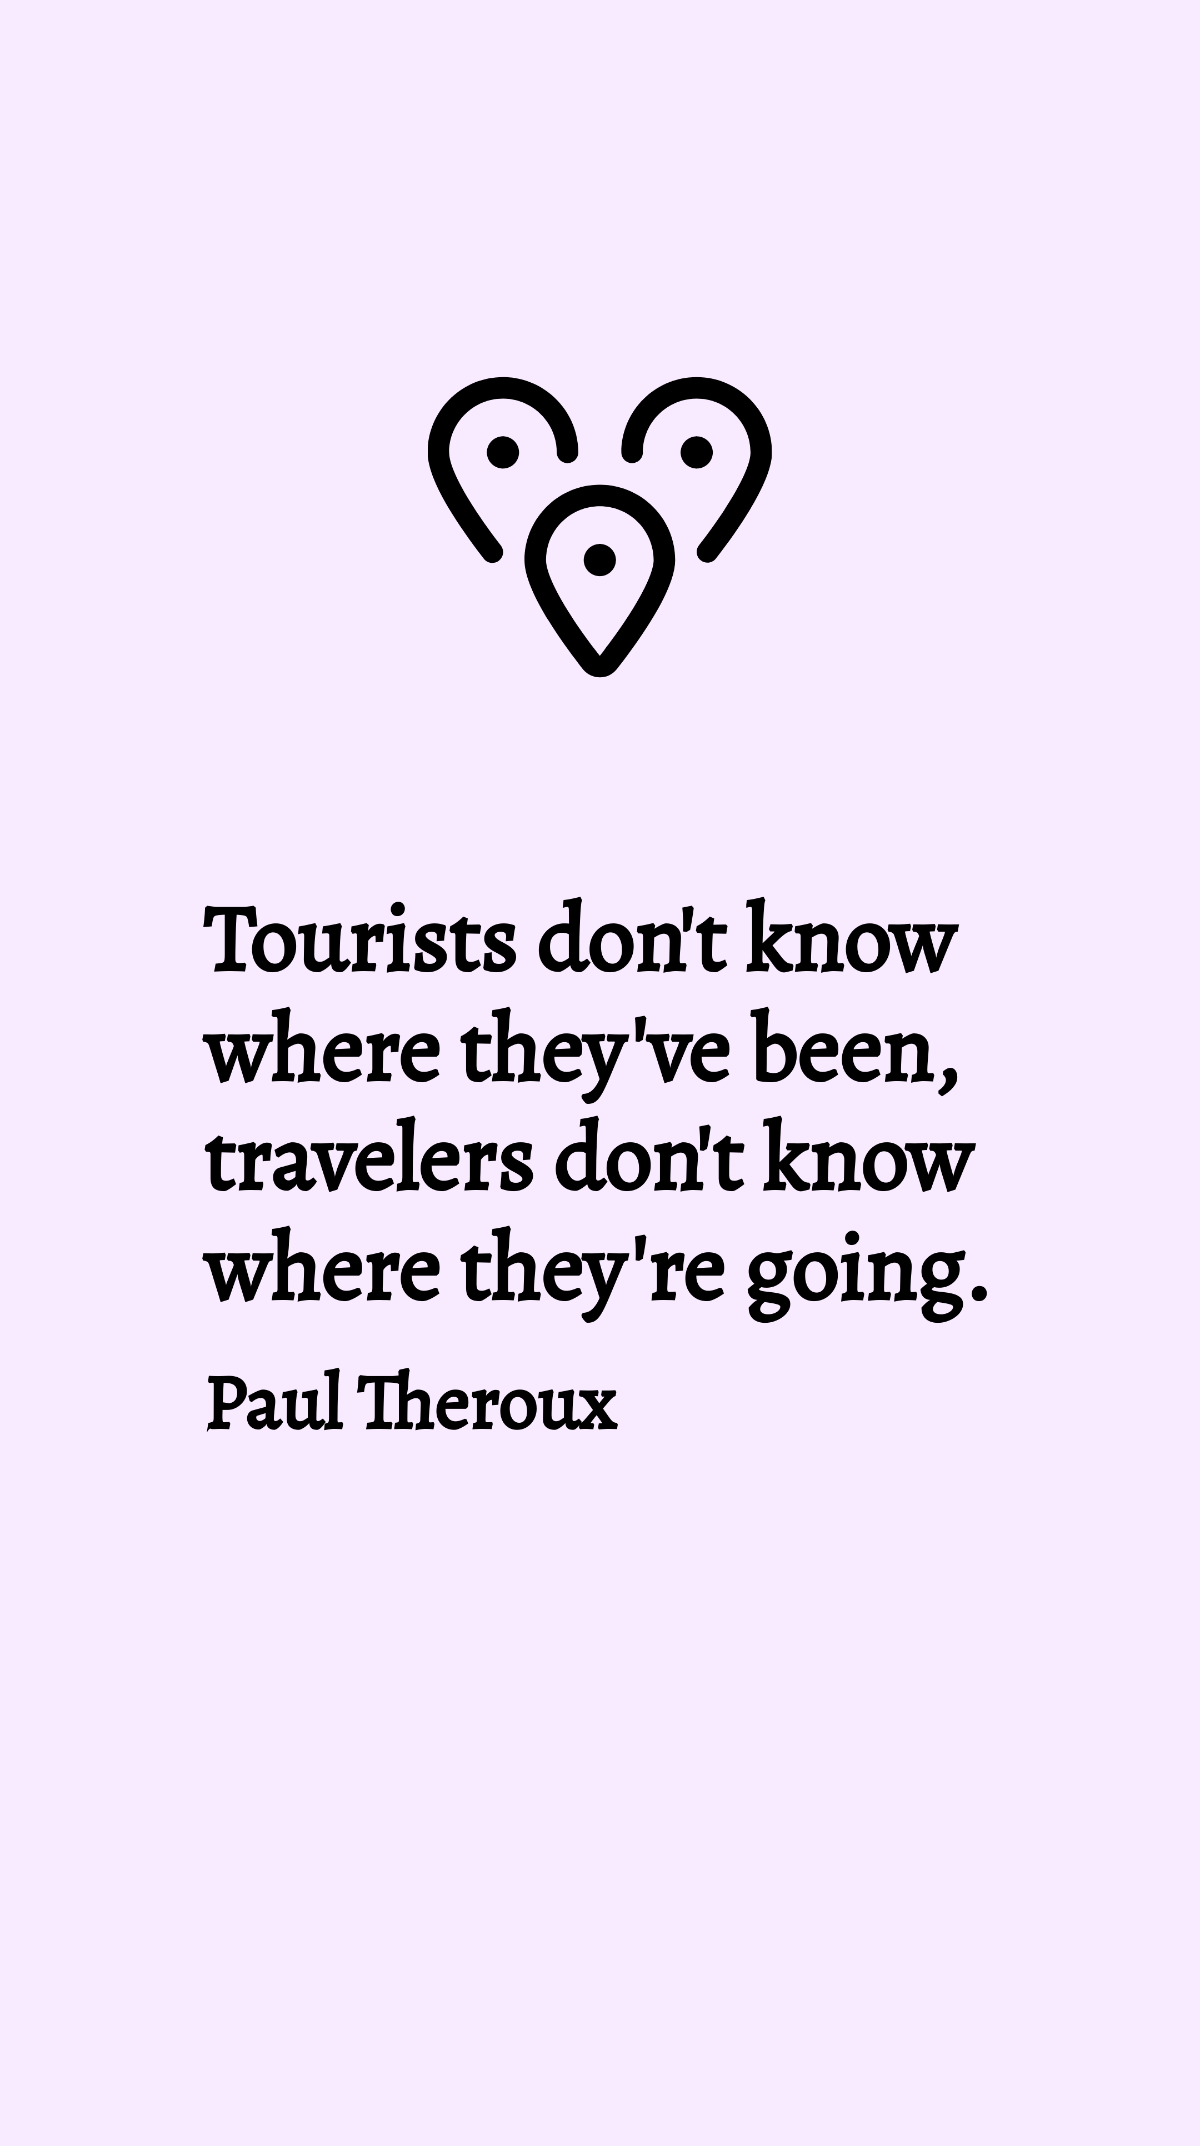 Paul Theroux - Tourists don't know where they've been, travelers don't know where they're going.